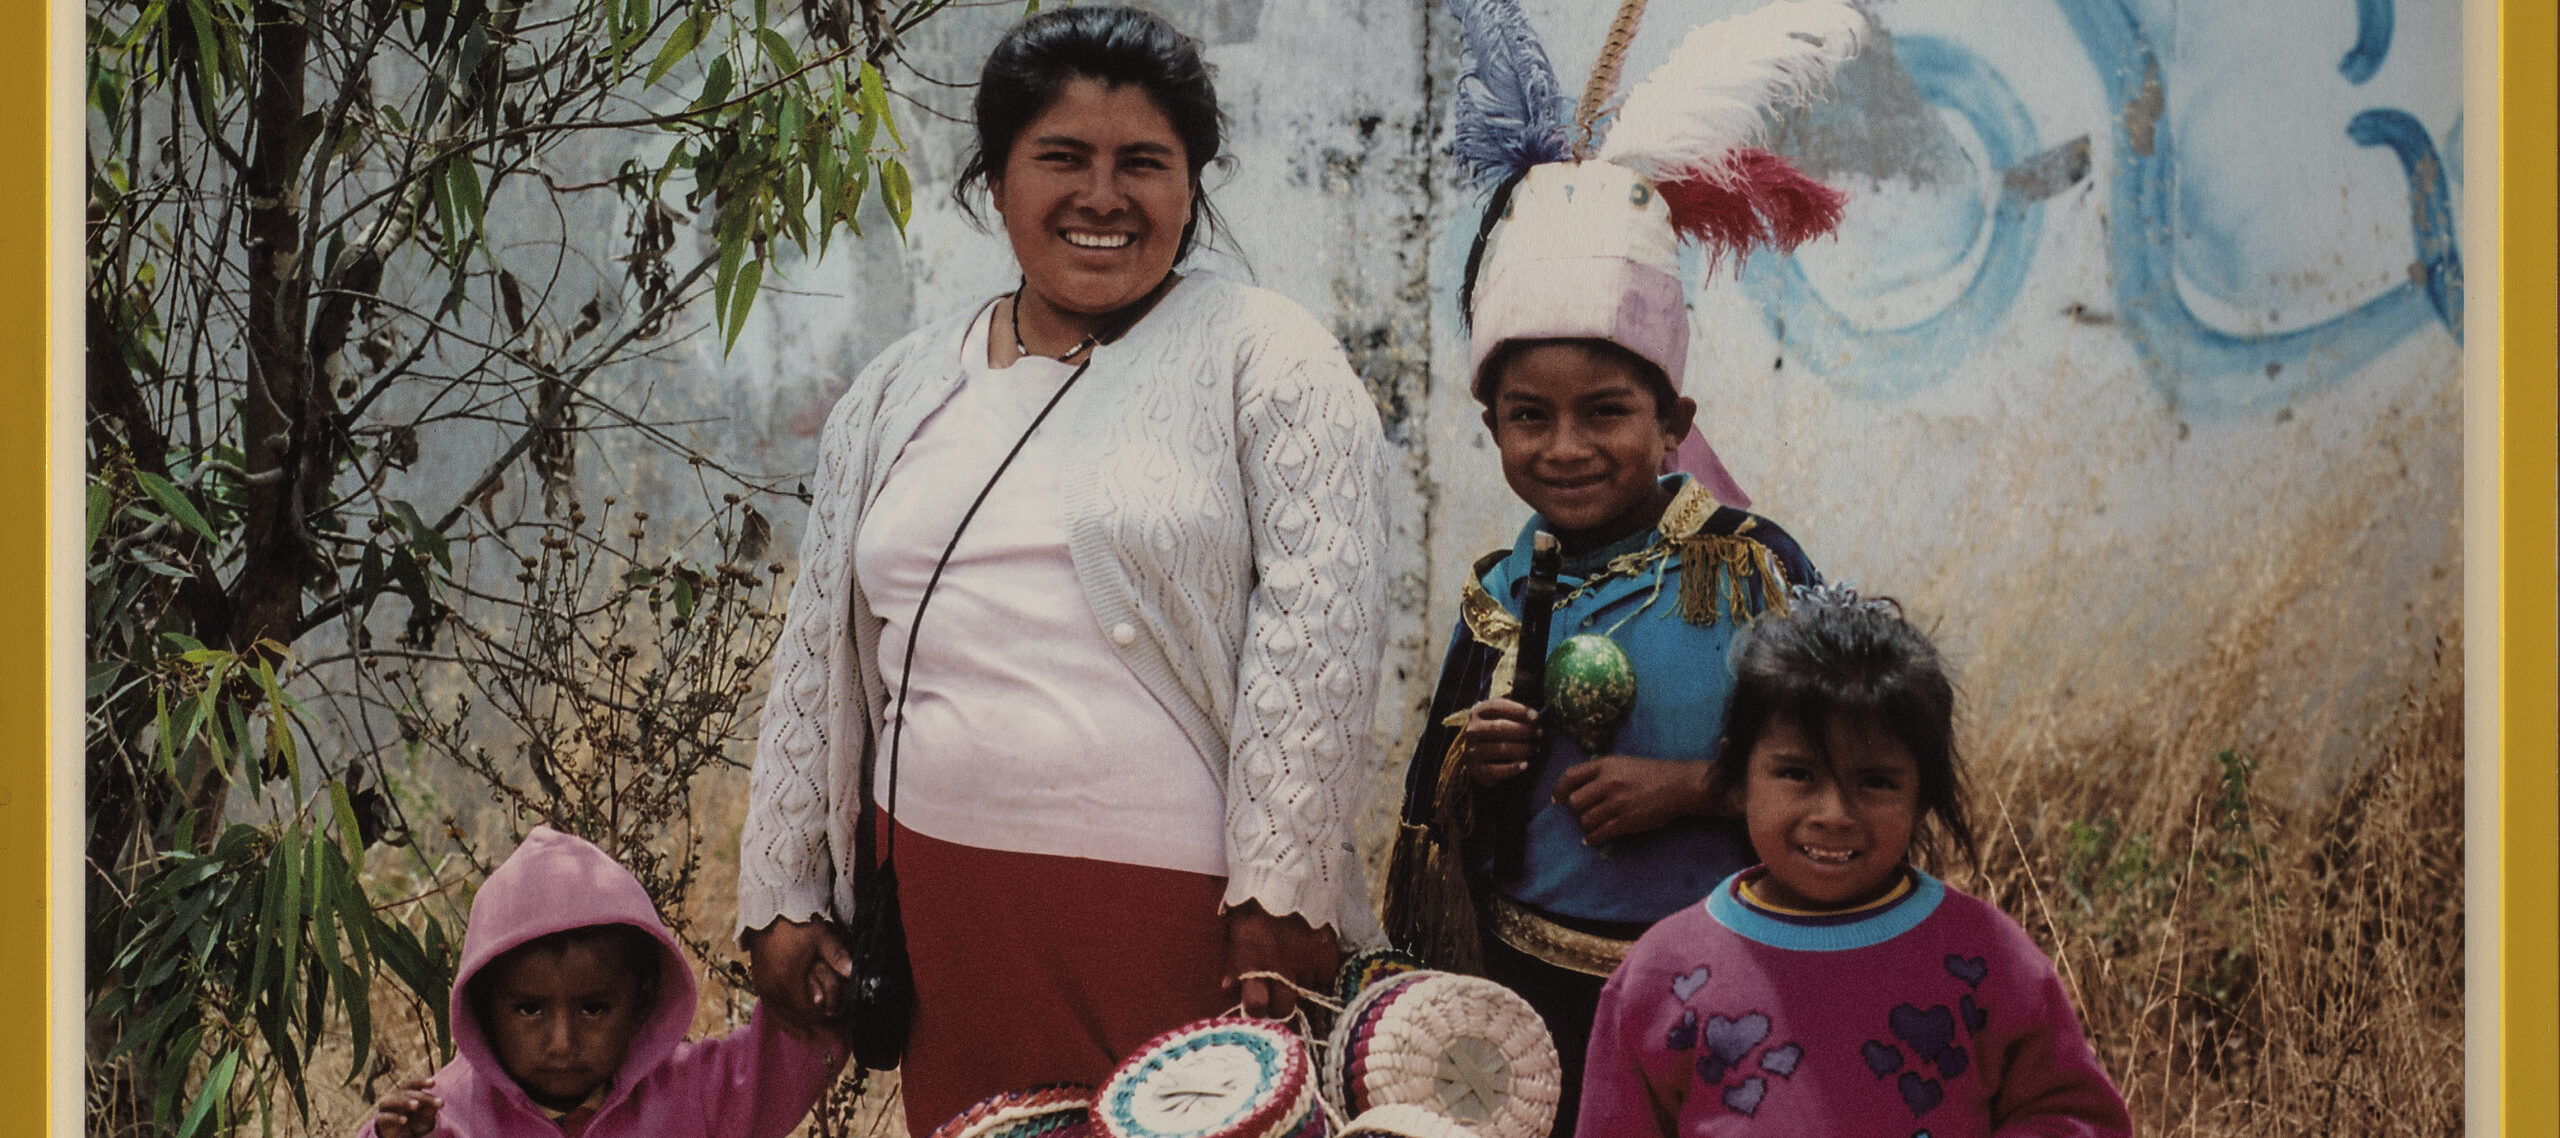 A yellow-framed photograph of four medium-skinned individuals—an adult woman and three young children. They stand in front of a cement wall with graffiti and hold multiple colorful baskets in their hands. Printed below them is the word 'Oaxaca'.